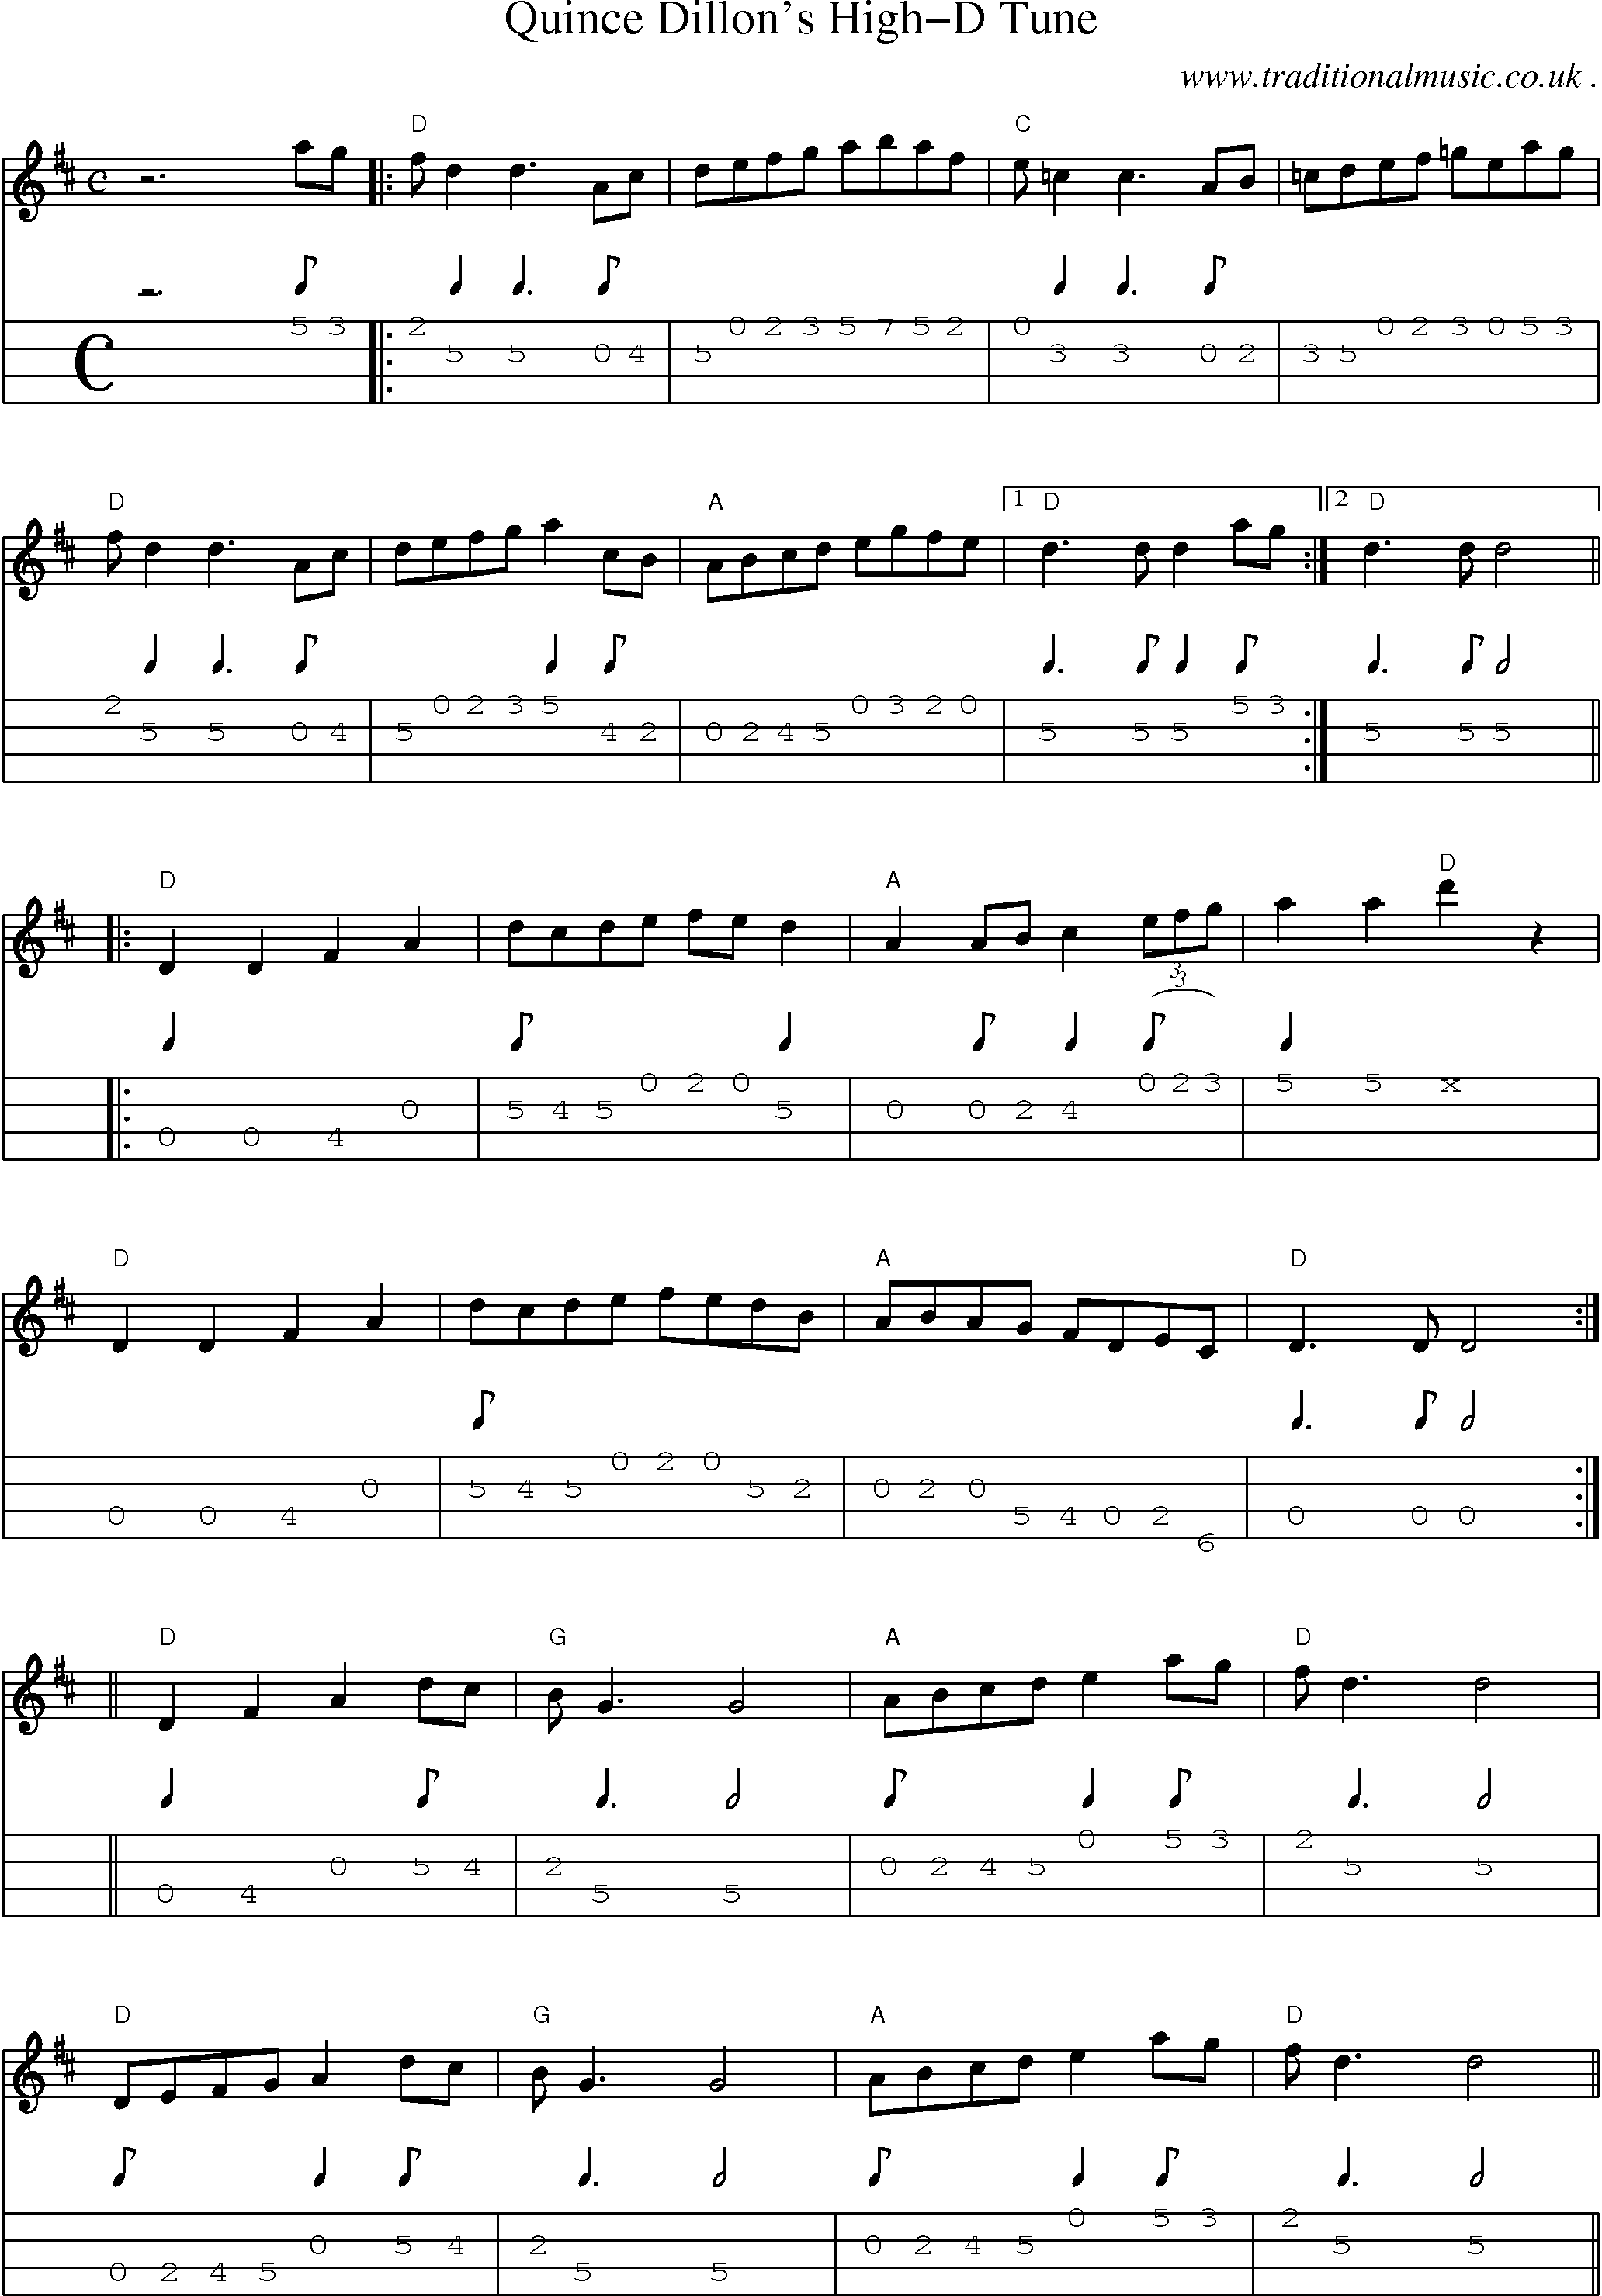 Music Score and Guitar Tabs for Quince Dillons High-d Tune